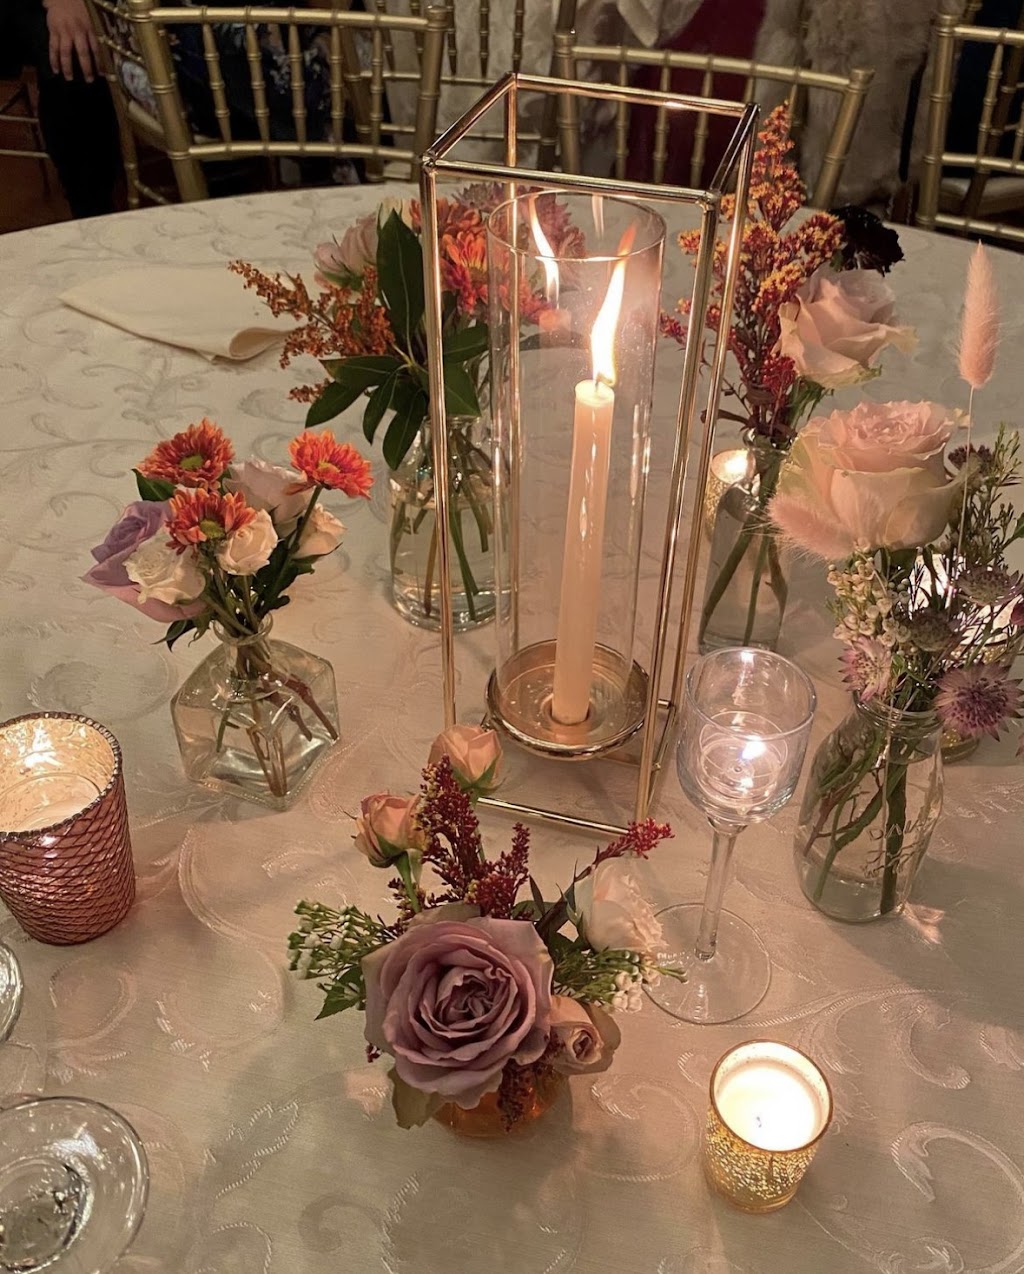 Petals floral & Party Design | 200 Forest Ave, Locust Valley, NY 11560 | Phone: (516) 674-9325